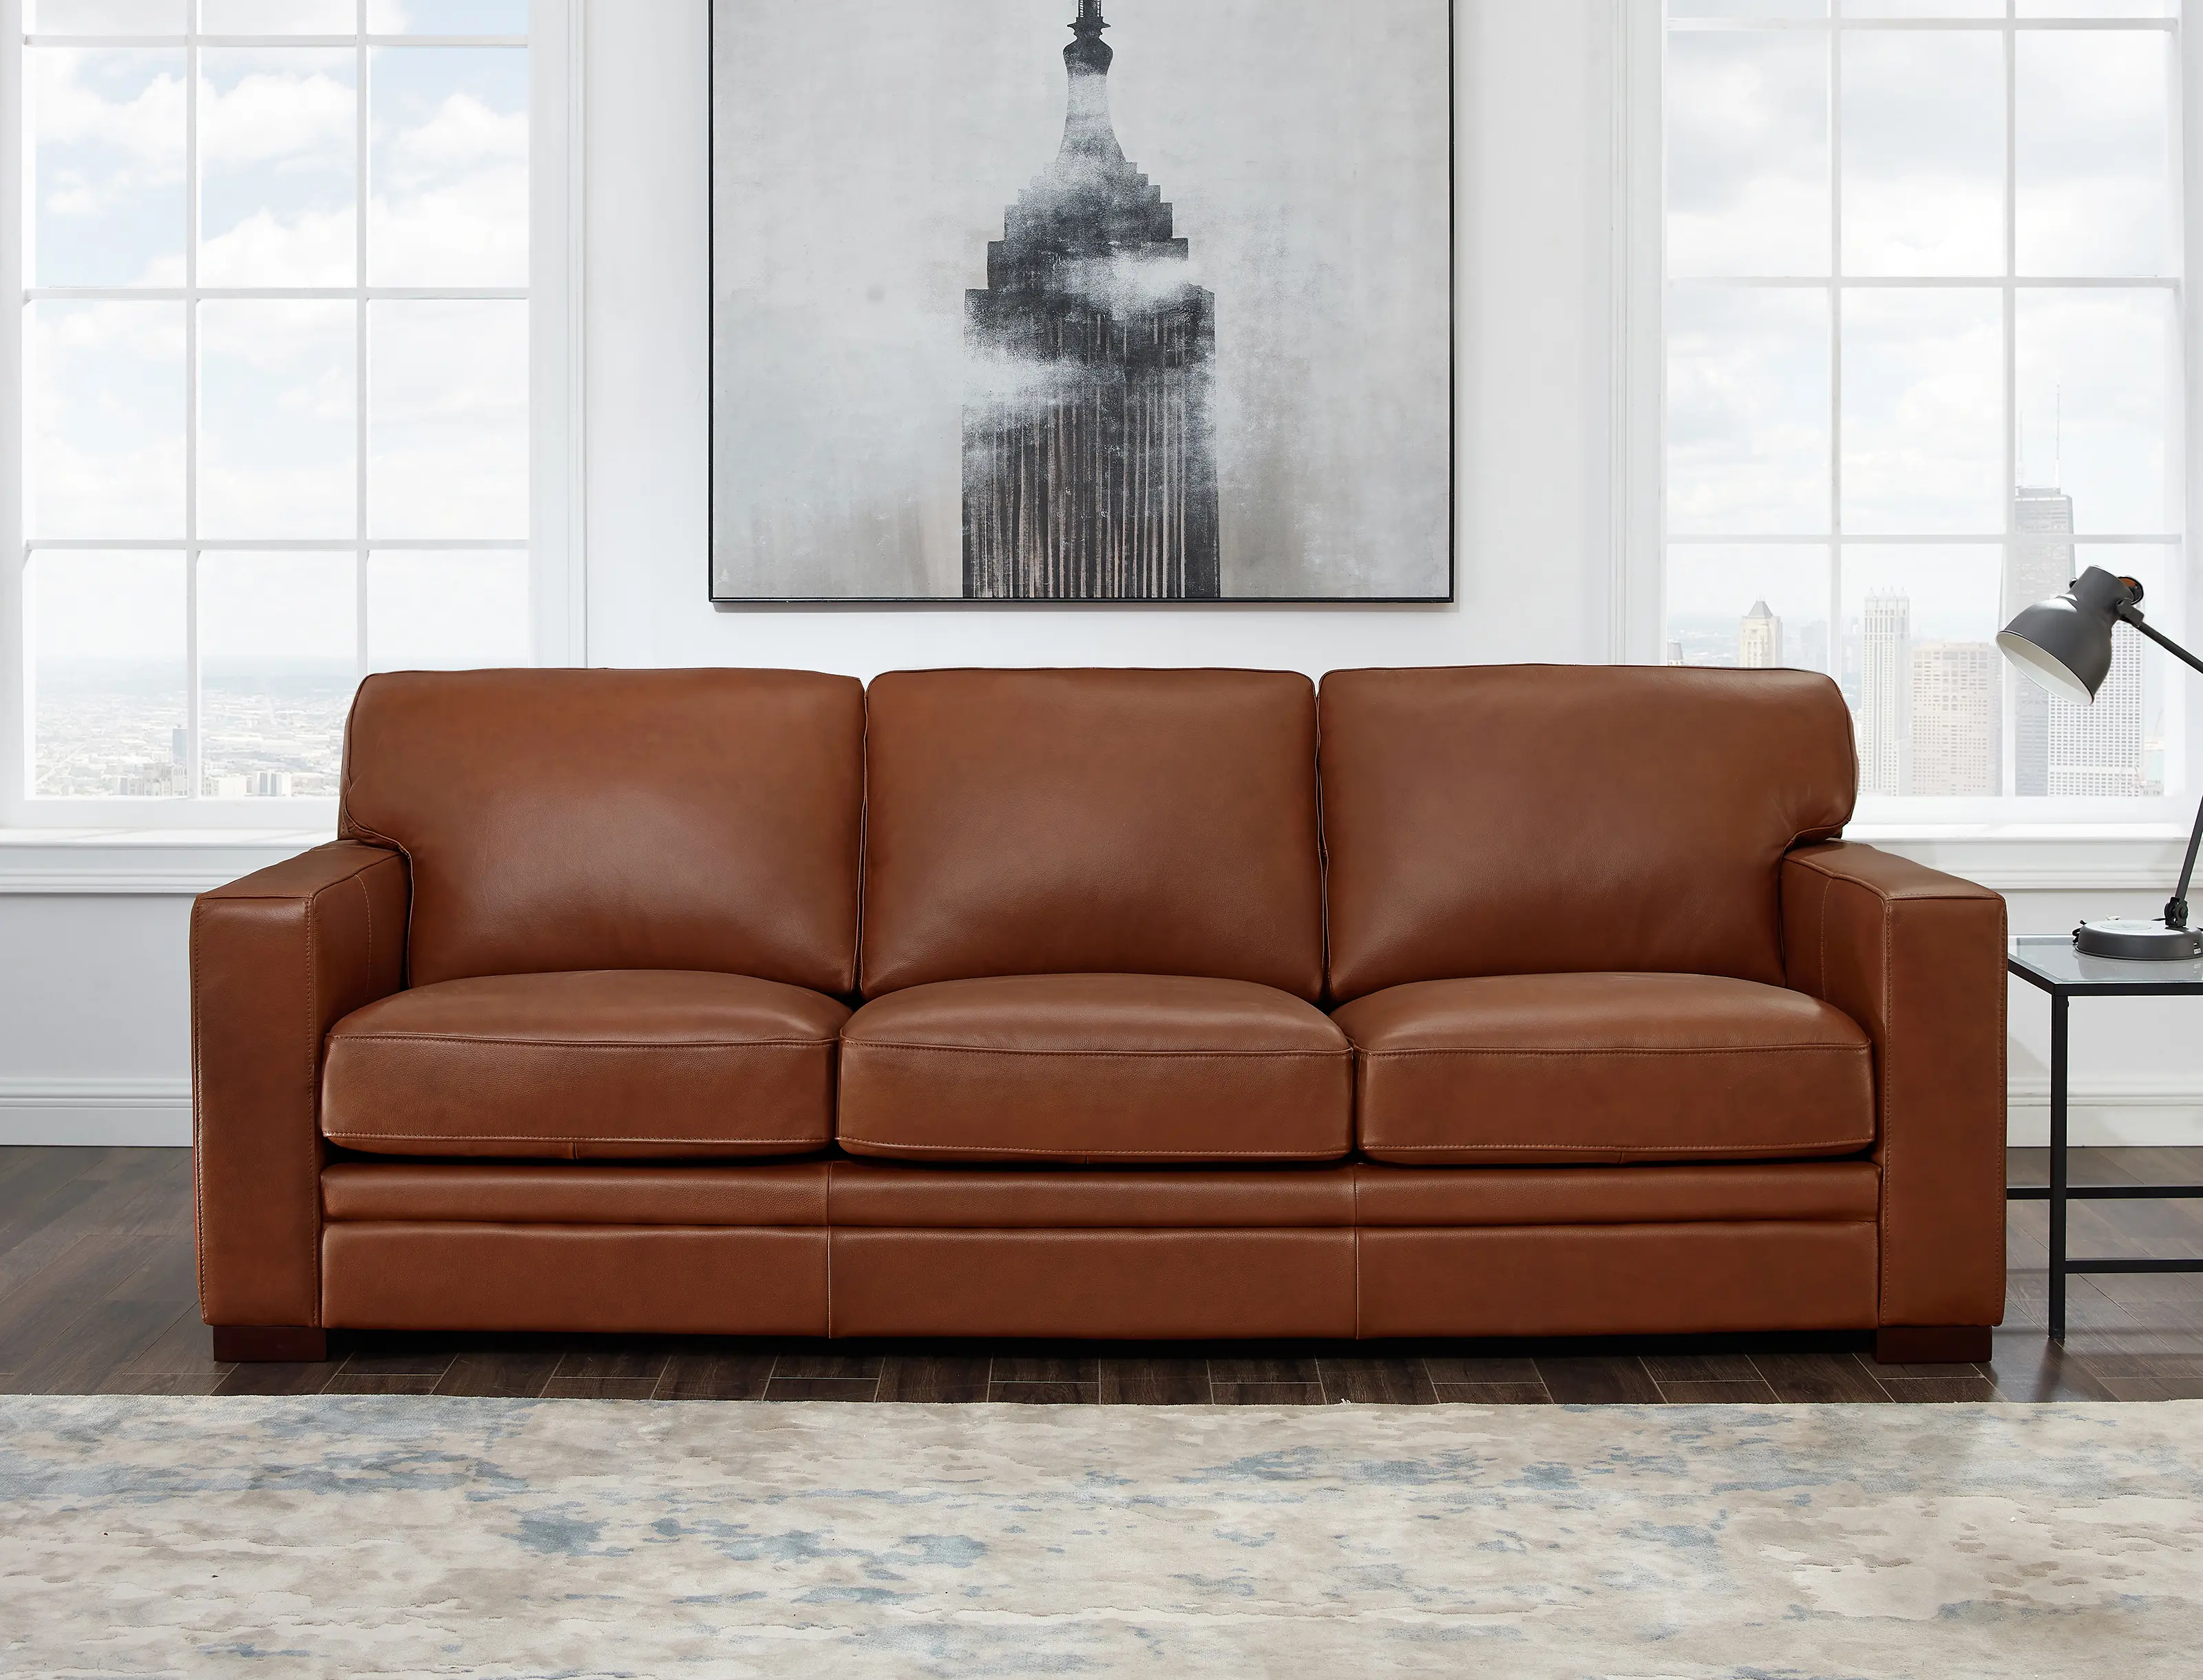 Chatsworth Brown Leather Sofa - Amax Leather